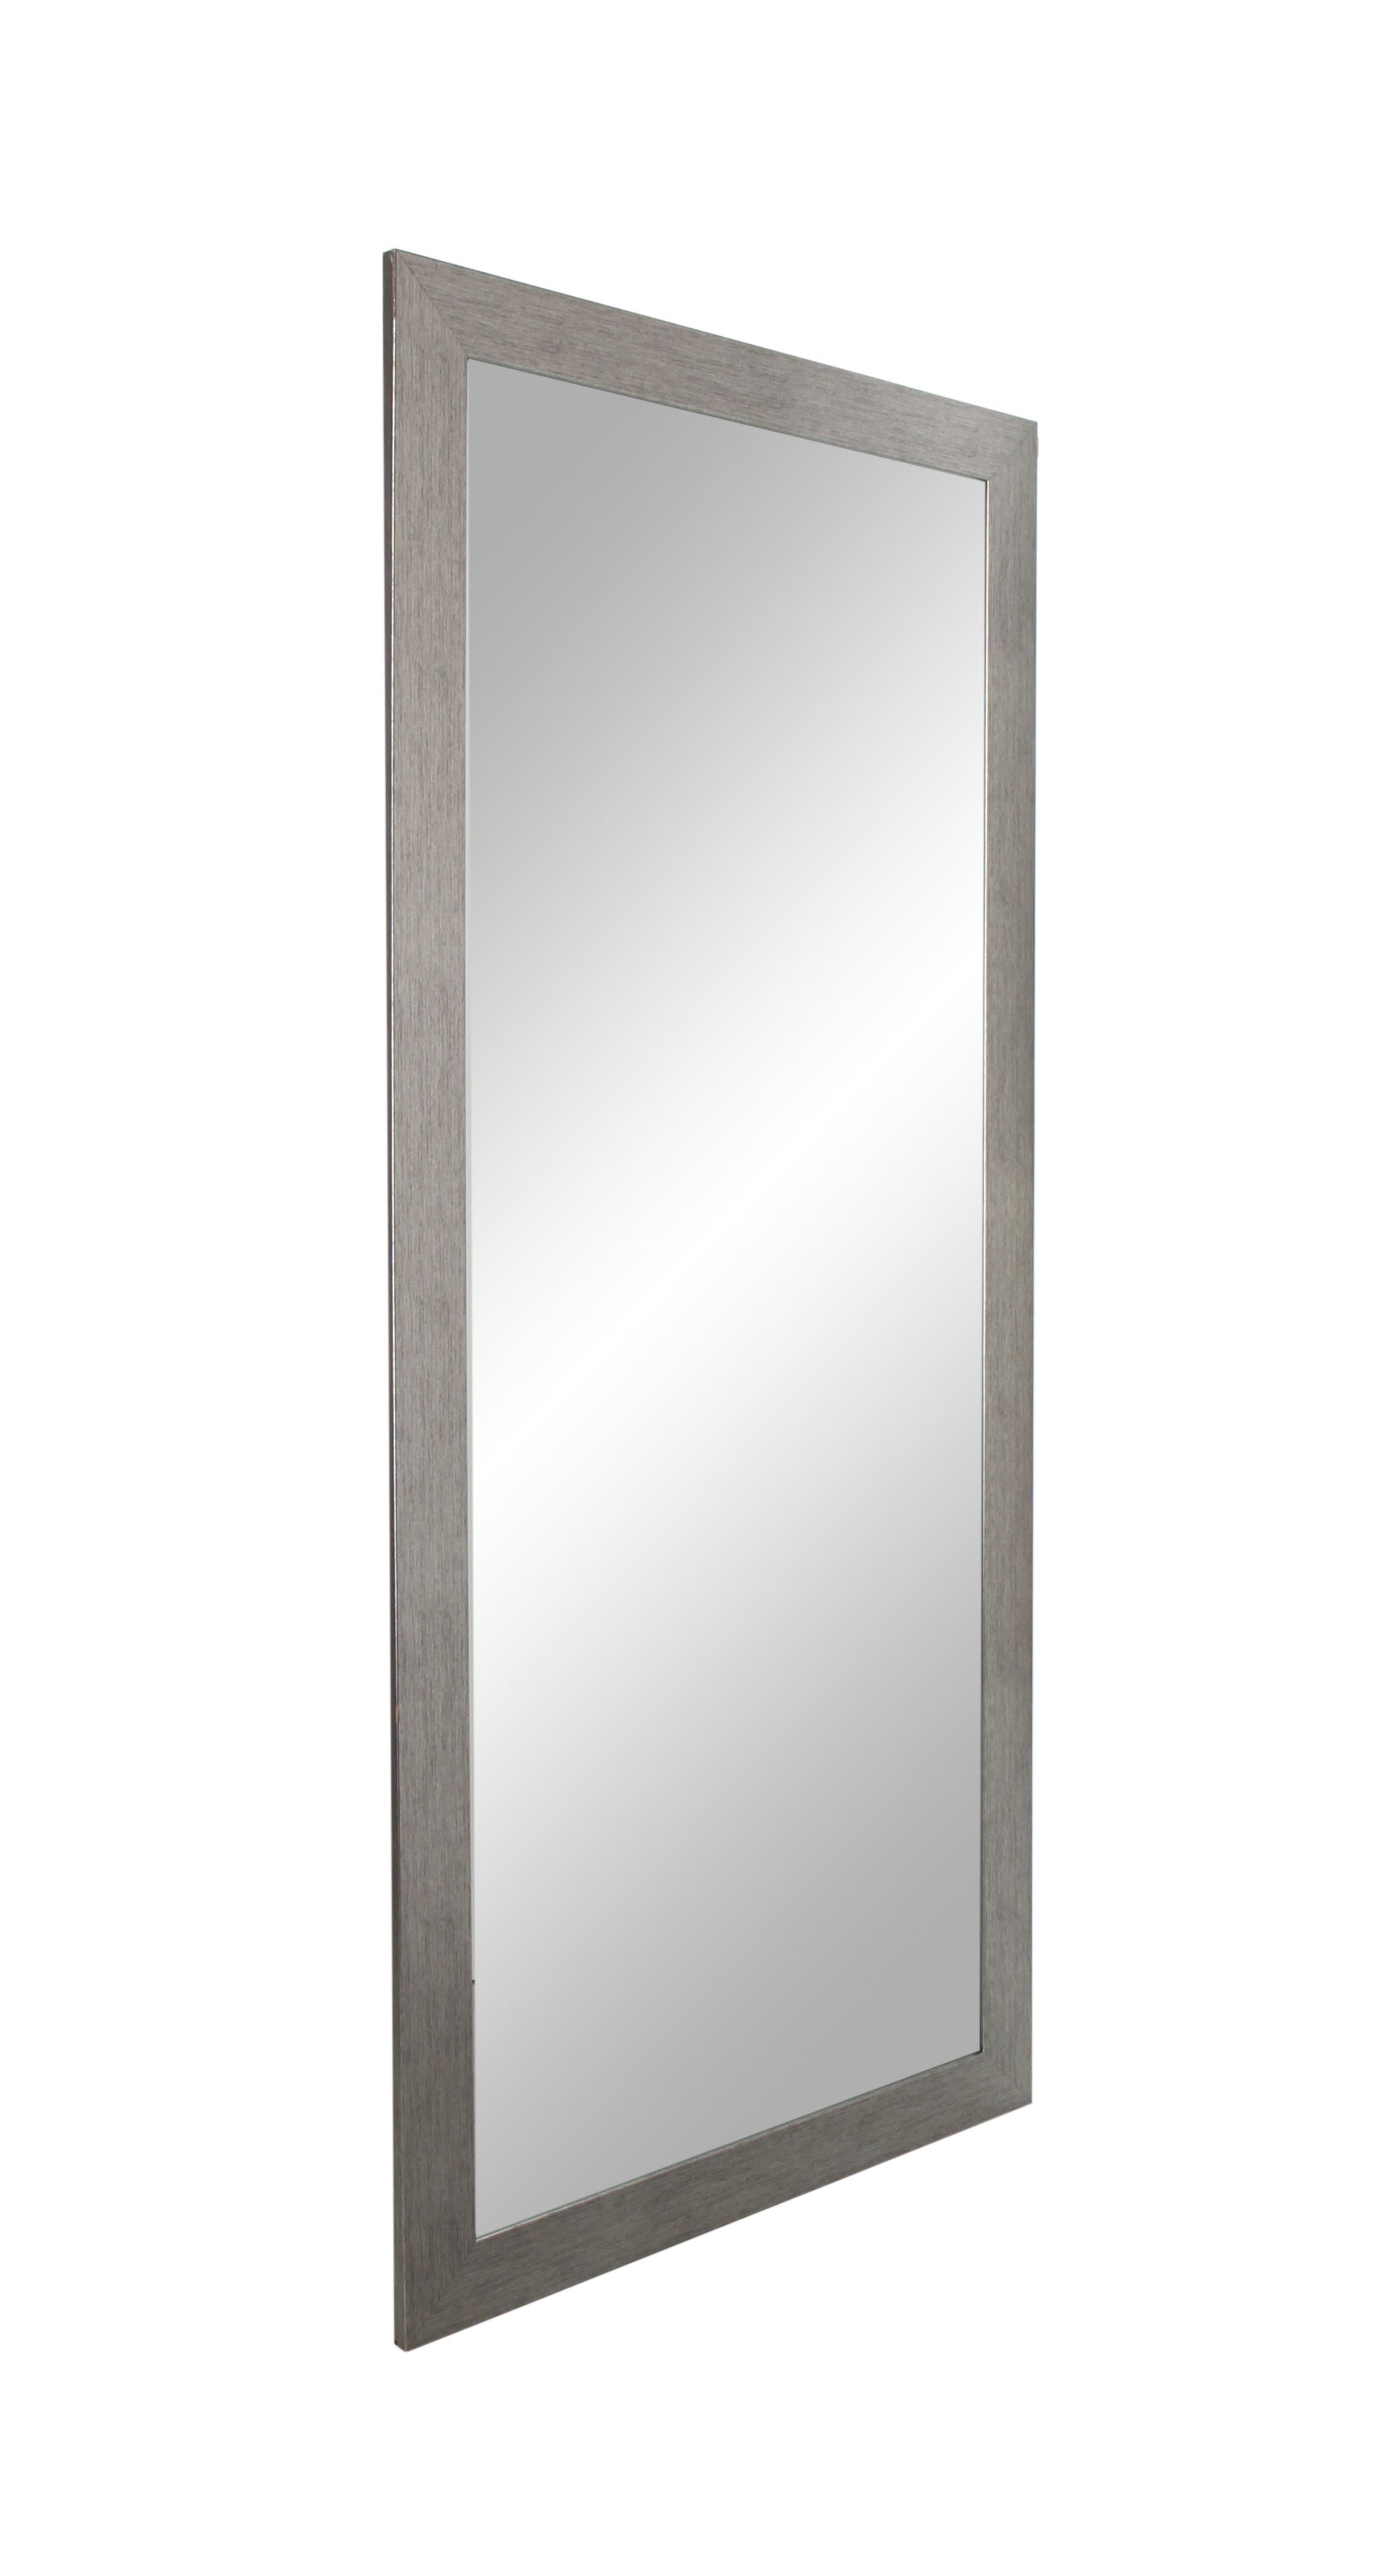 Giannone Grain Full Modern & Contemporary Length Mirror Inside 2019 Handcrafted Farmhouse Full Length Mirrors (View 11 of 20)